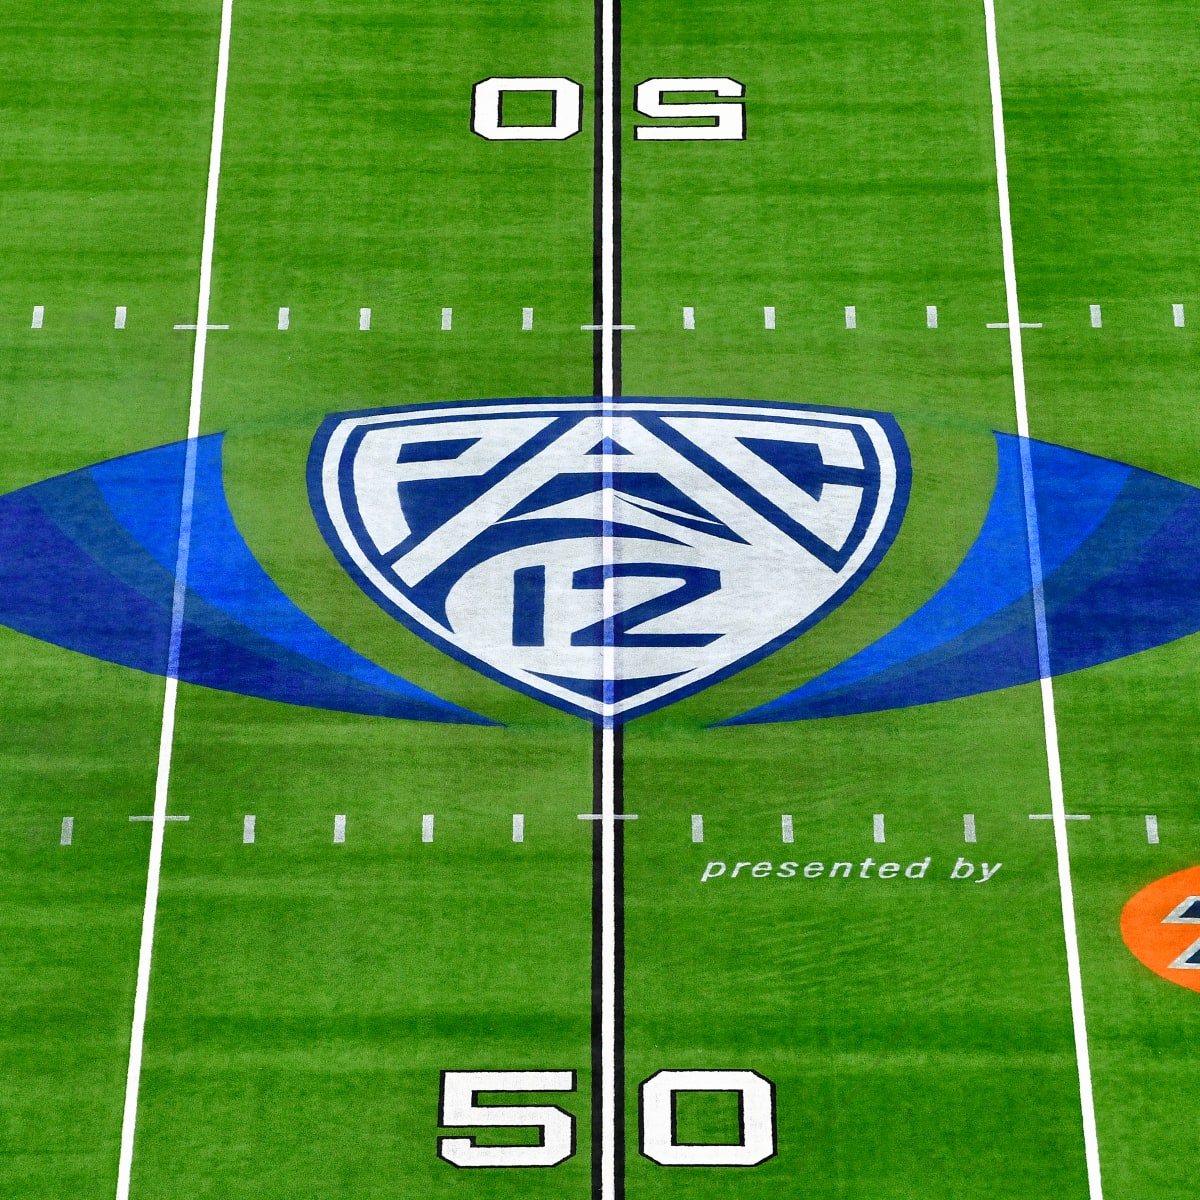 News: Pac-12, NFL Sunday Ticket and more - Sports Media Watch